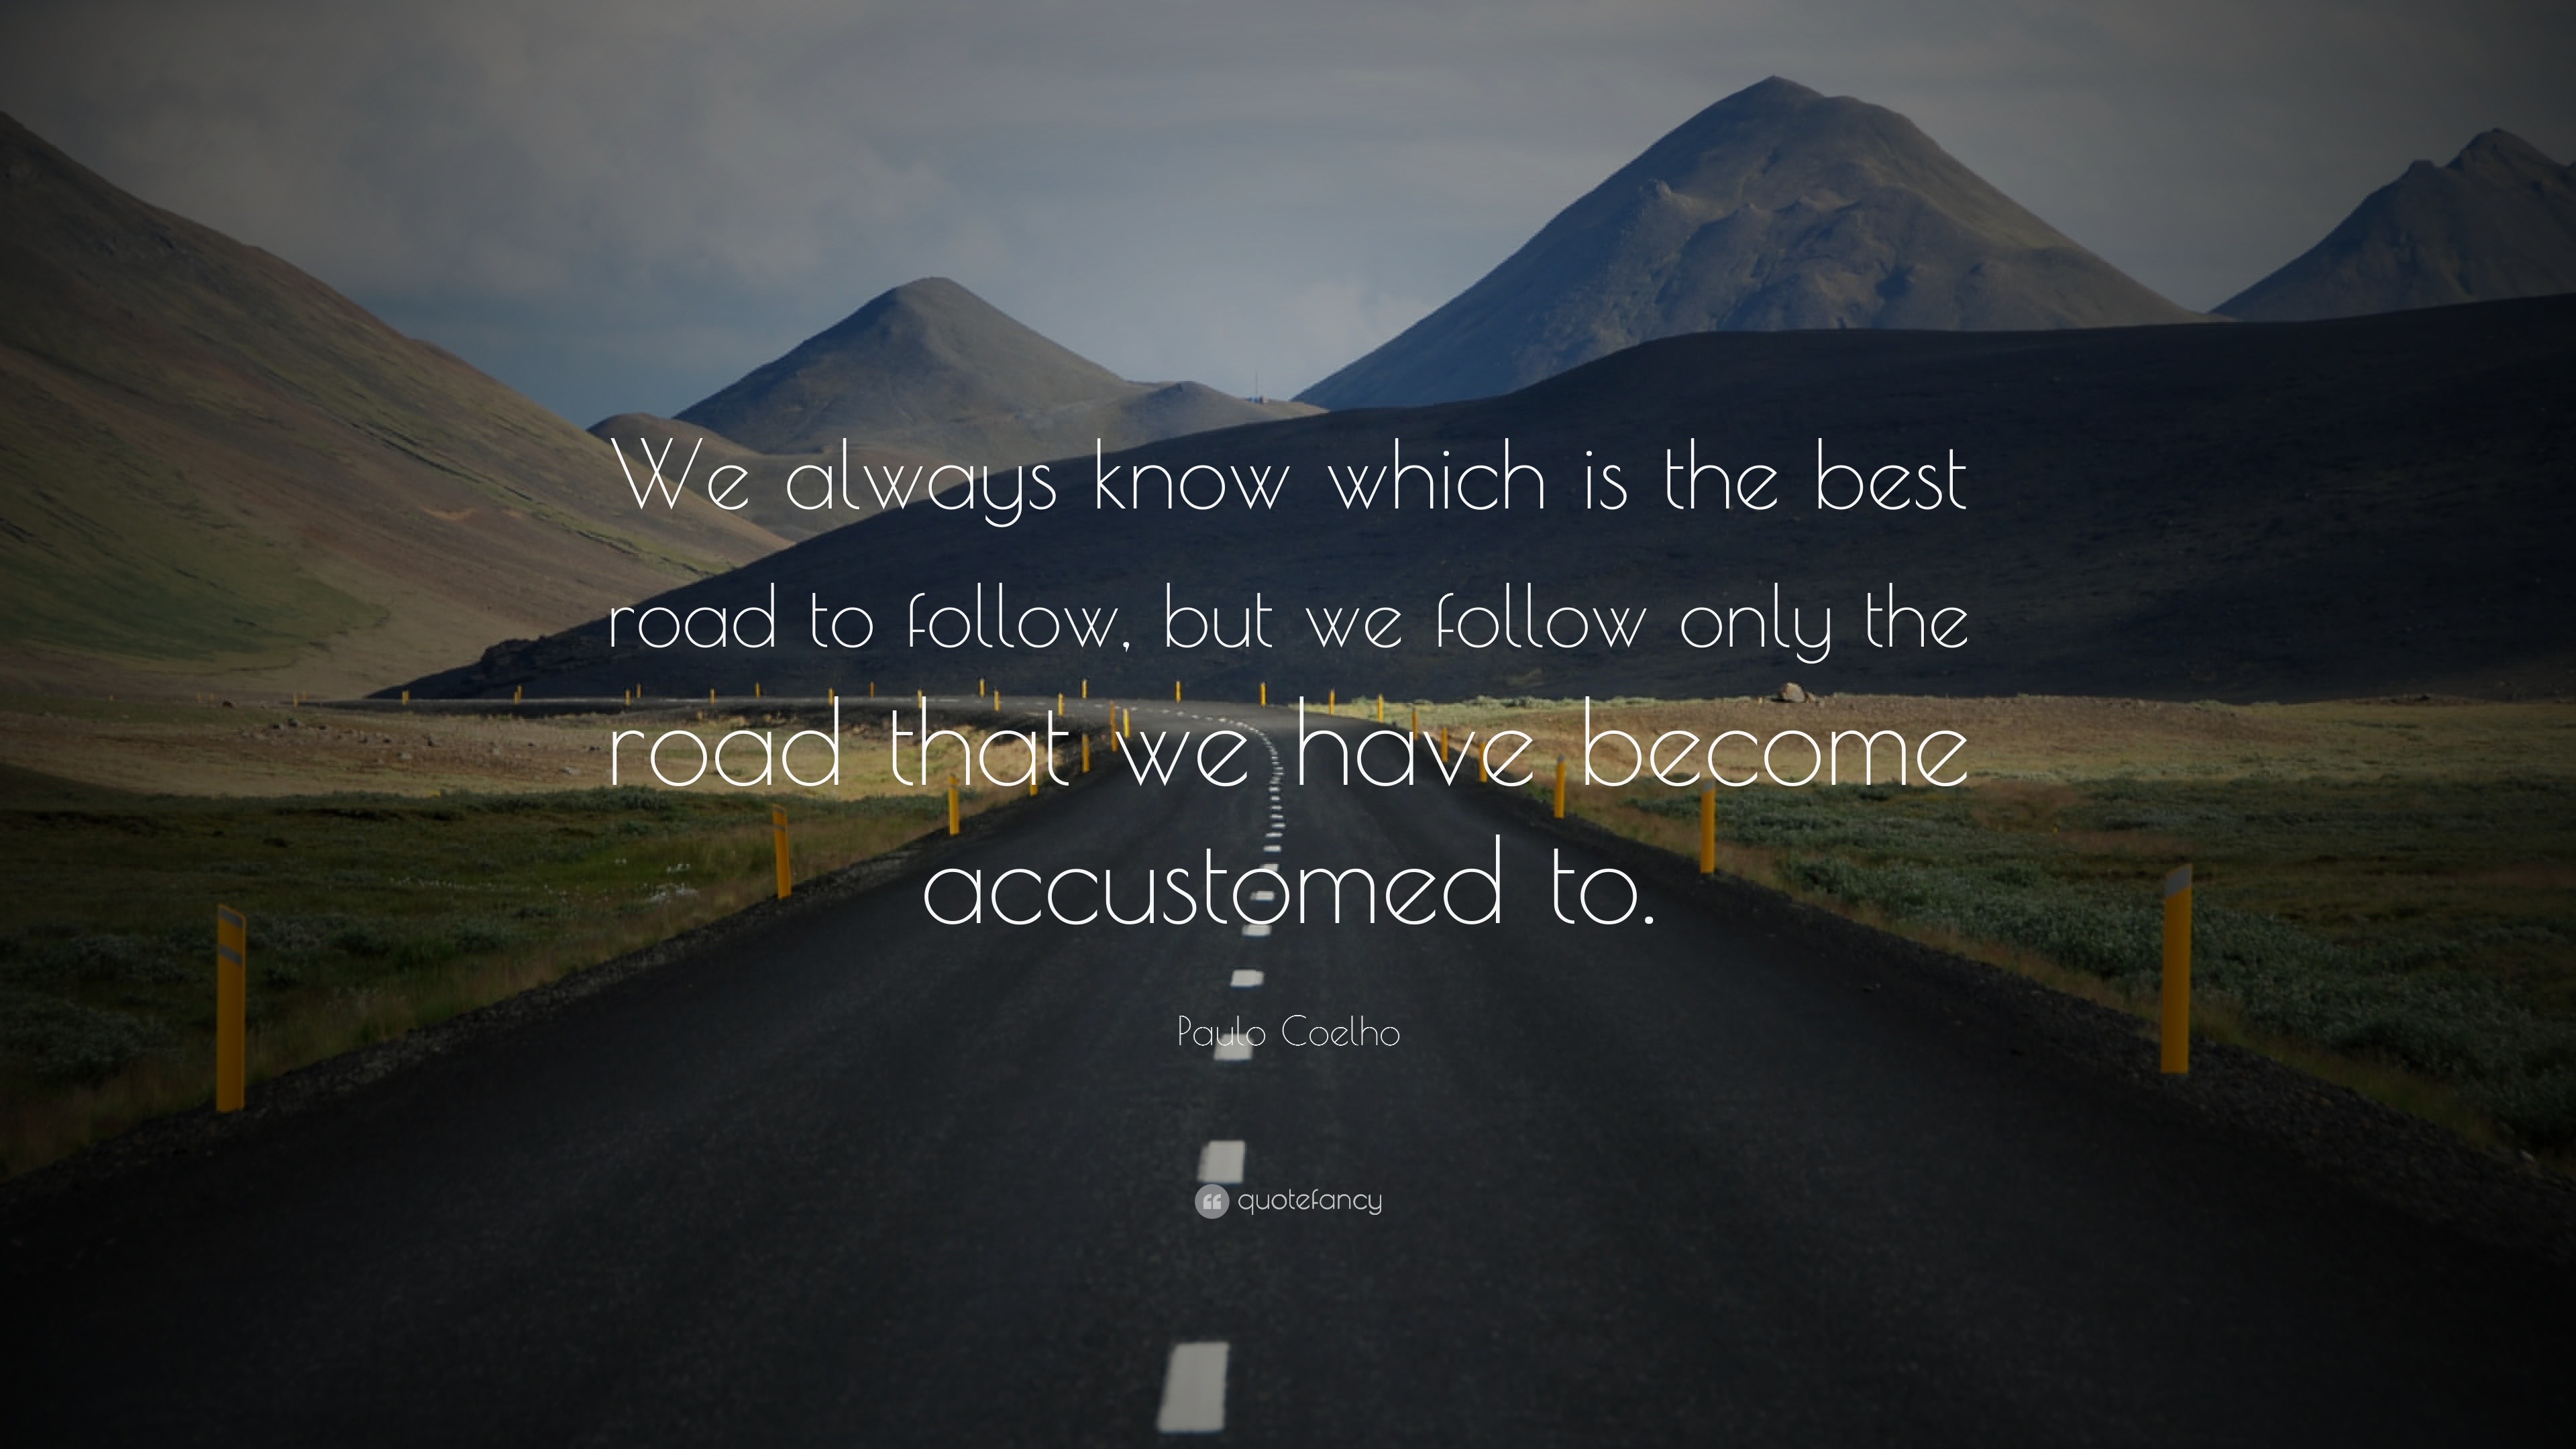 Paulo Coelho Quote: “We always know which is the best road to follow